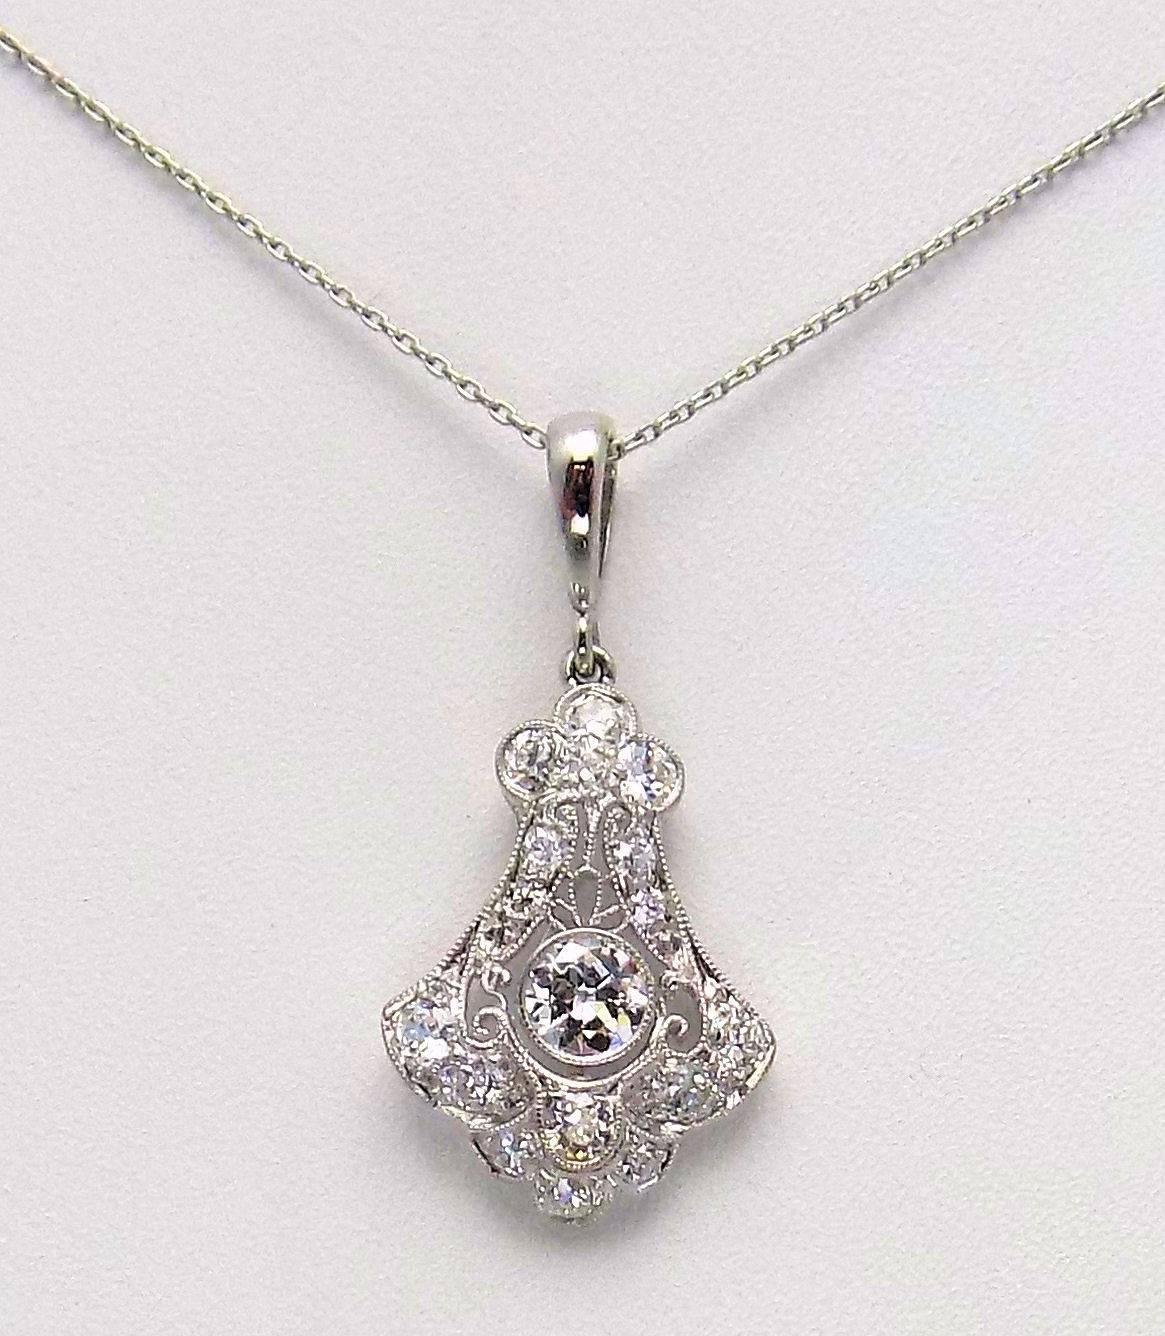 Antique platinum filigree pendant of exceptional workmanship, set with European cut diamonds. There are 17 European cut diamonds .66 carat, VVS/VS, F-G.   The last photo shows the workmanship of Oscar Heyman, an old New York company, known for high